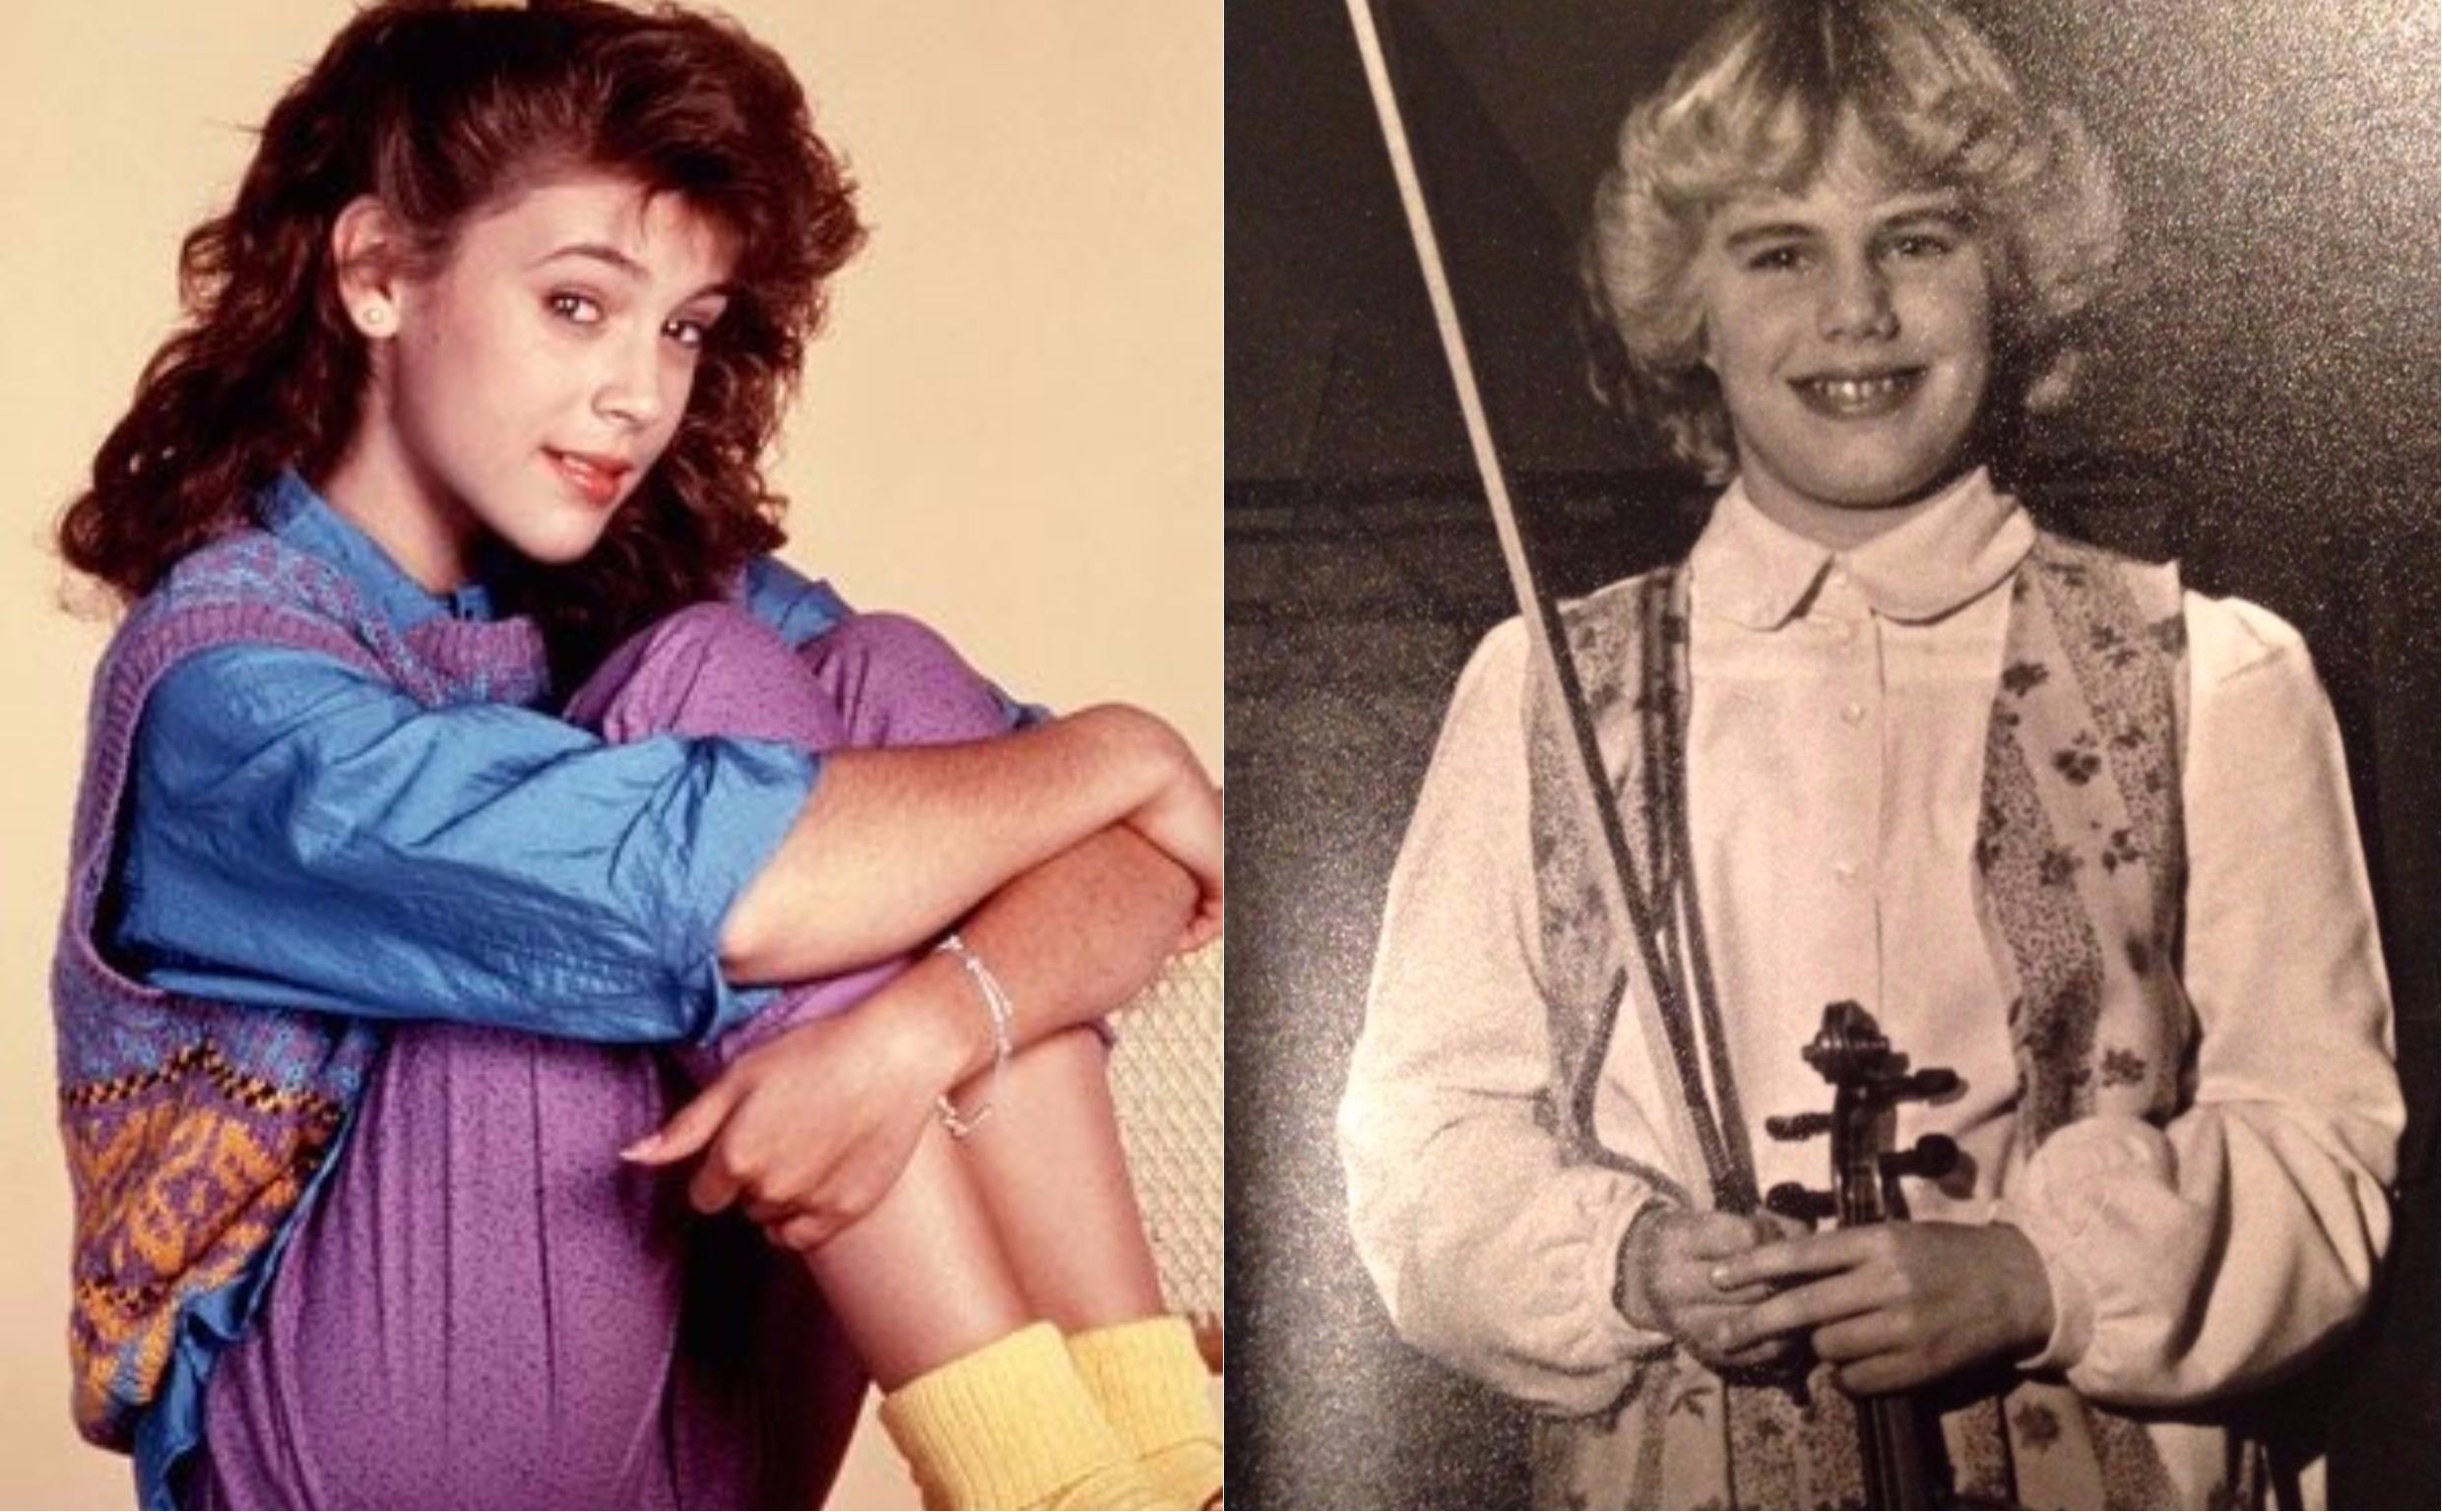 Singer Alyssa Milano and journalist Gretchen Carlson posted their photos using #MeAt14